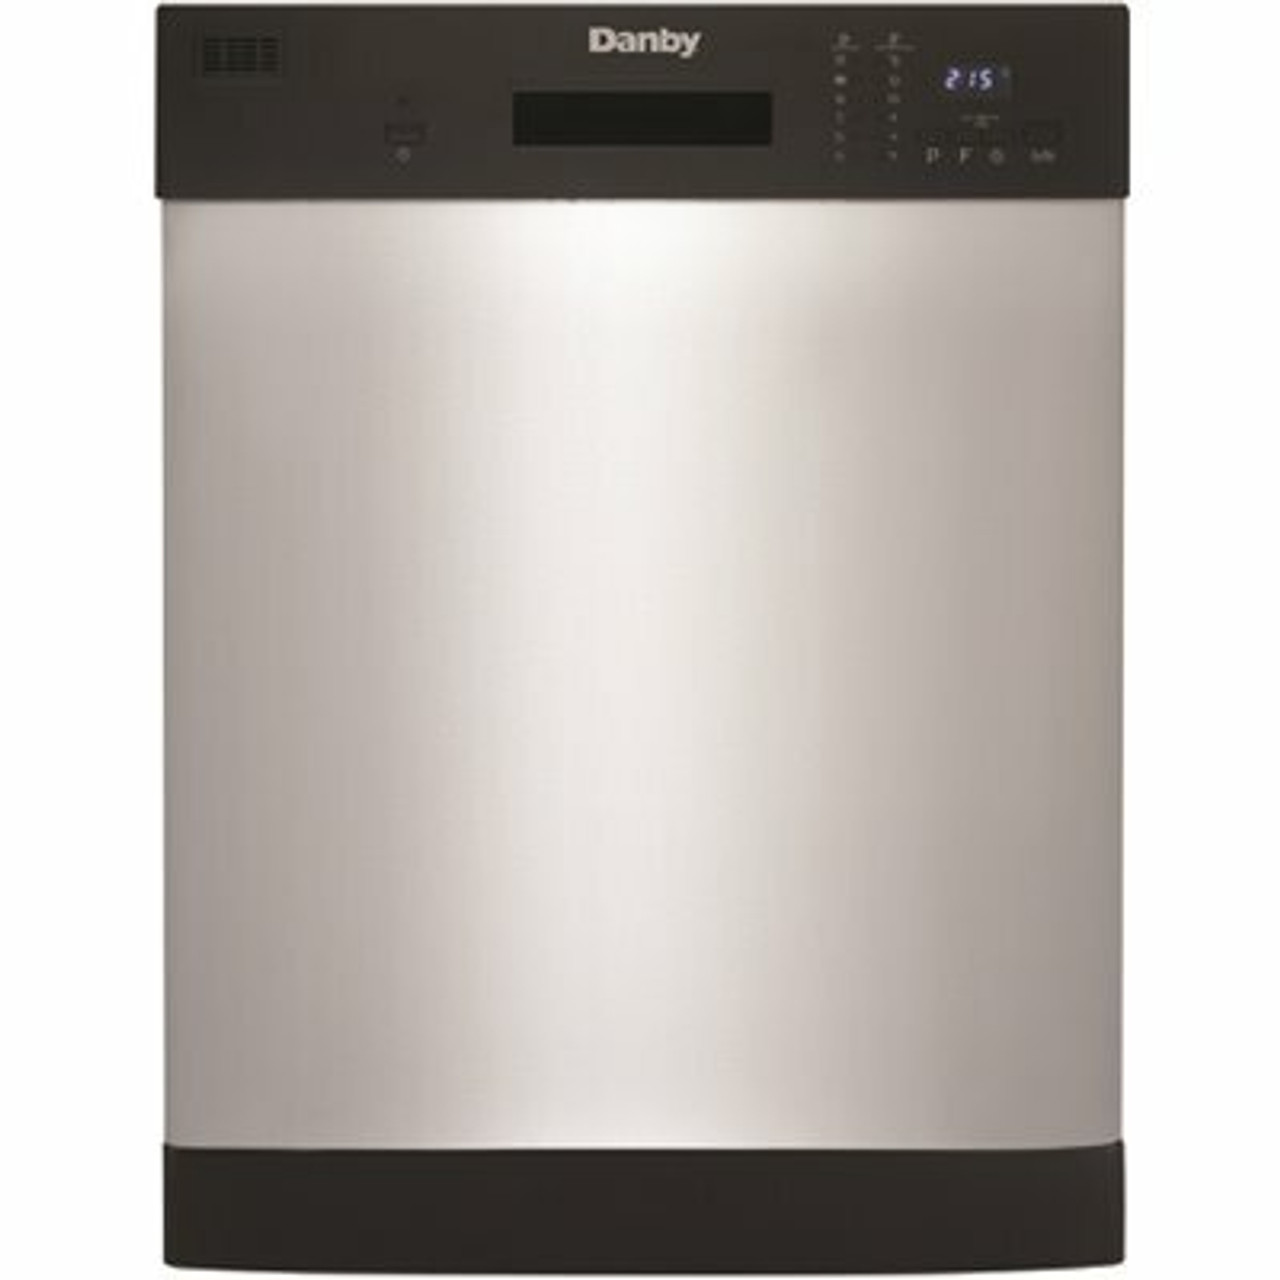 Danby 24 In. Stainless Steel Front Control Smart Dishwasher 120-Volt With Stainless Steel Tub